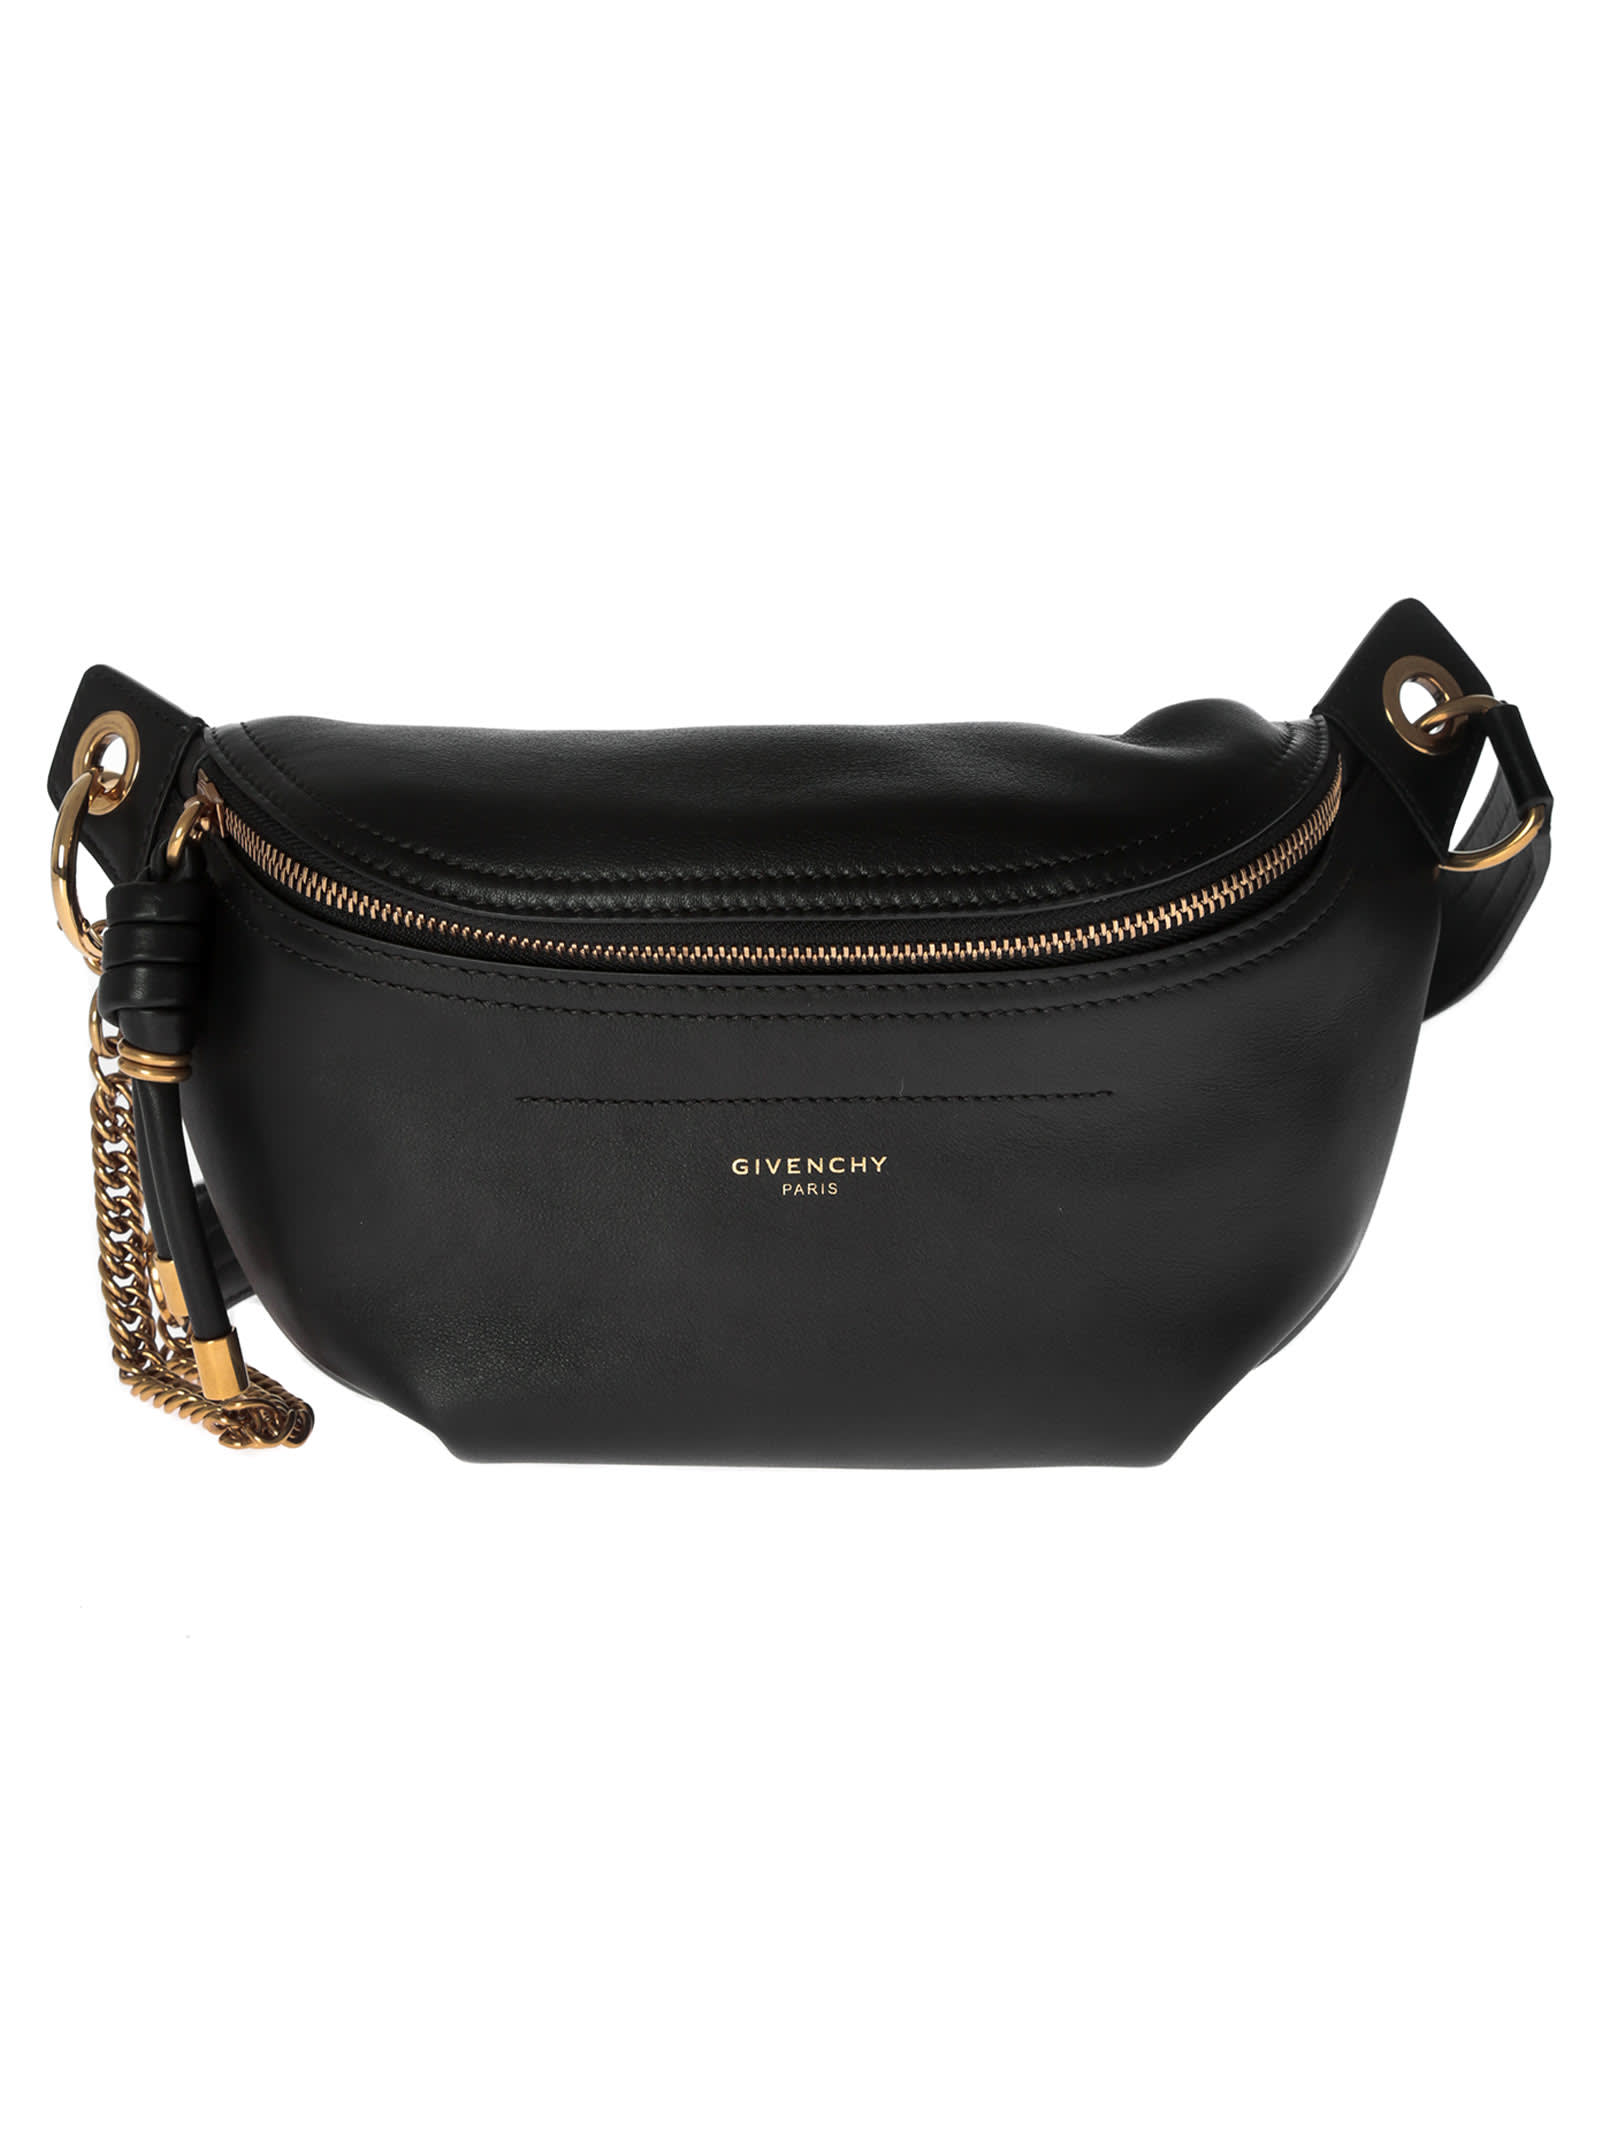 Givenchy Givenchy Whip Belt Bag - 11020634 | italist